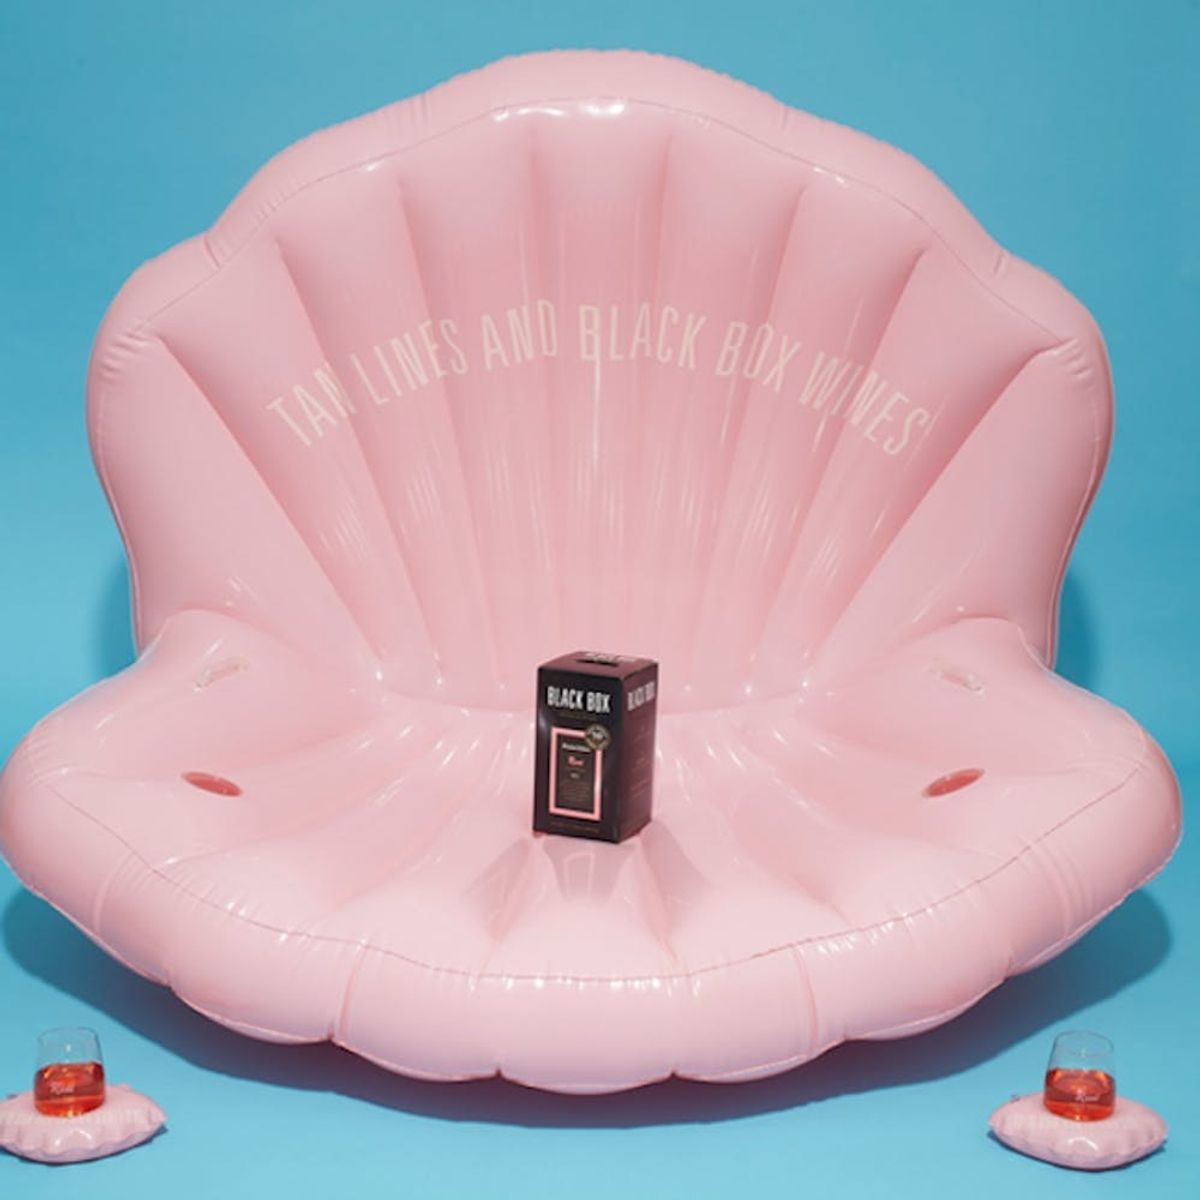 You Absolutely Need This Floating Chaise Lounge SPECIFICALLY Made for Drinking Rosé